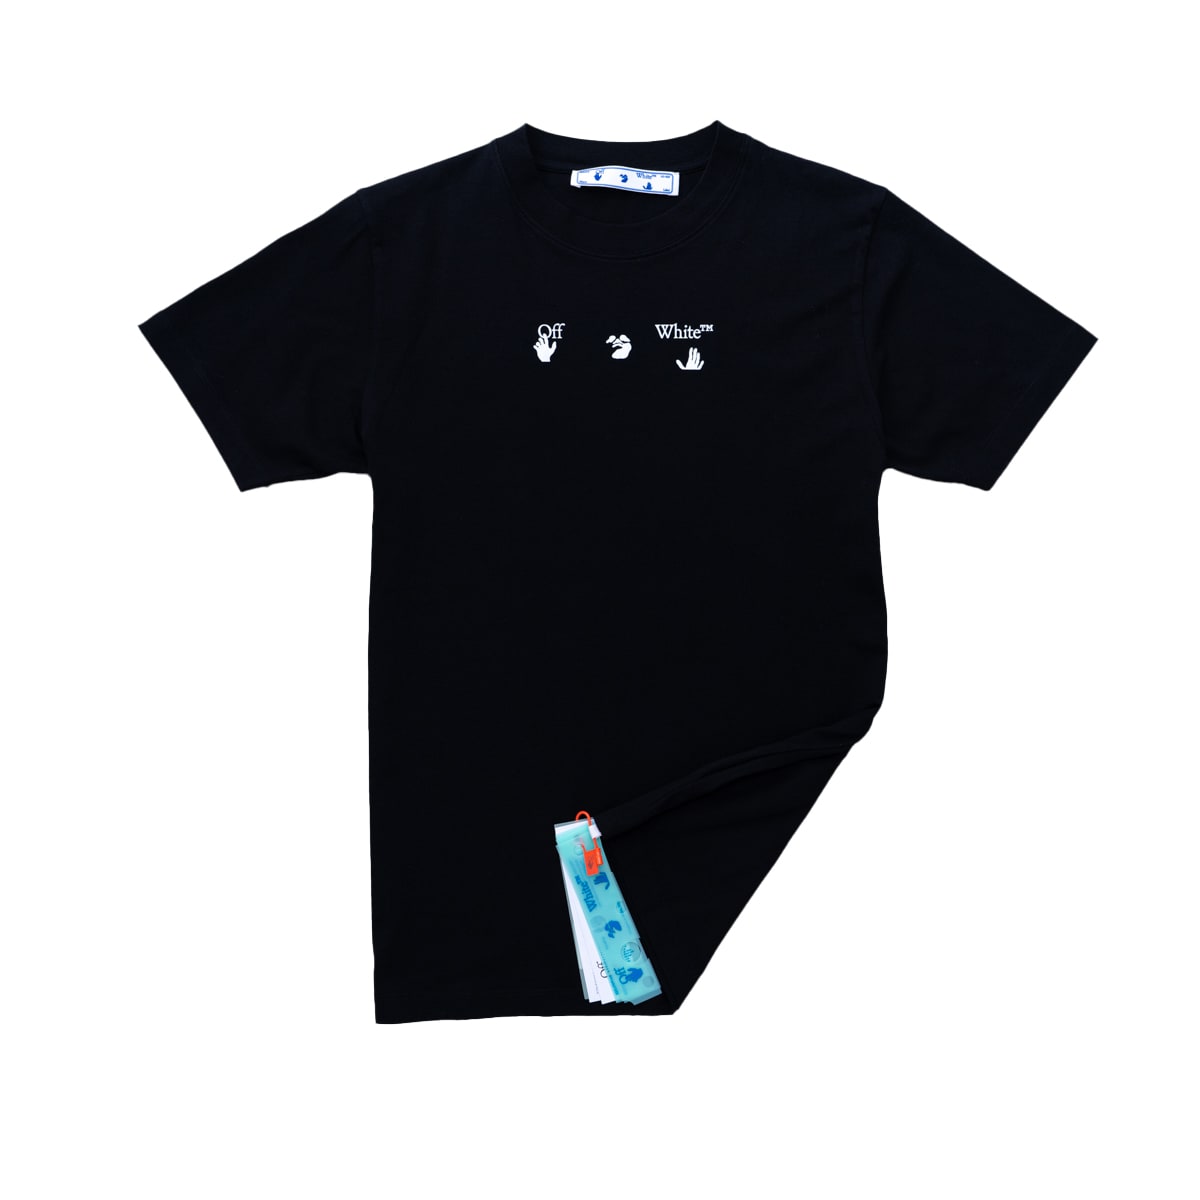 OFF-WHITE OFF-WHITE OFF-WHITE COTTON T-SHIRT,OMAA027S21JER009 1001